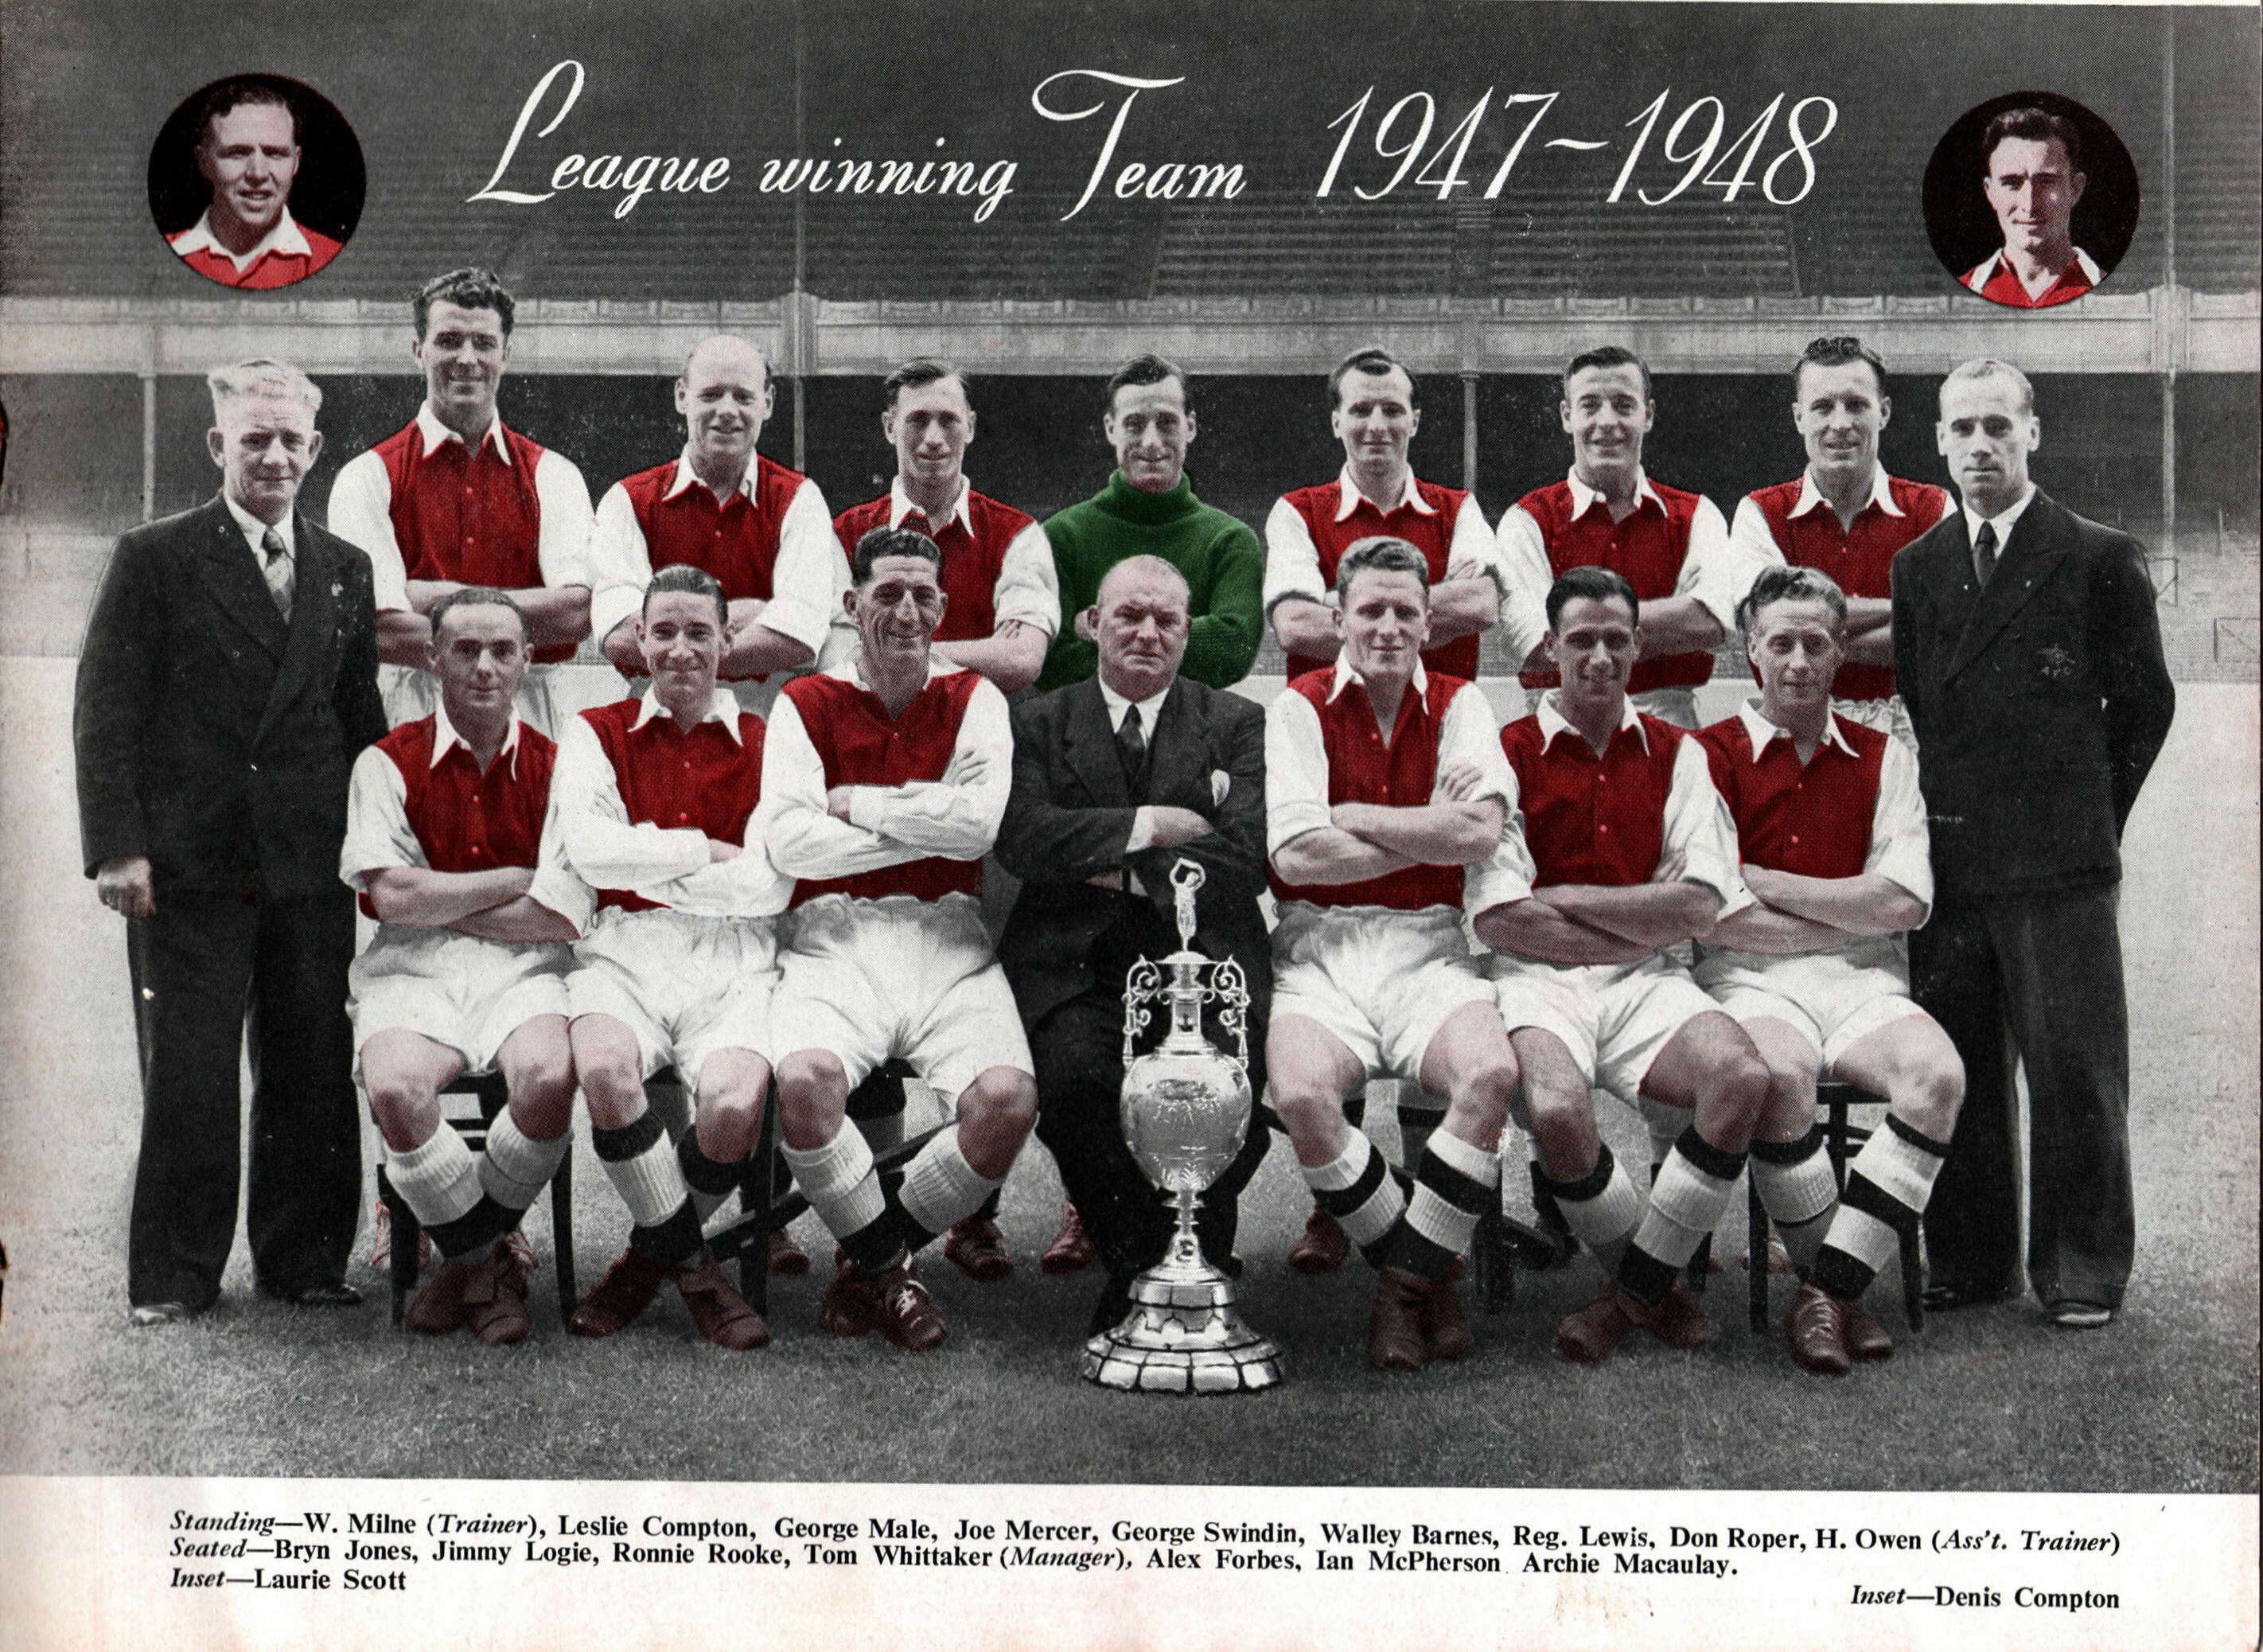 History: Reg Lewis -The legendary Arsenal striker who stayed for 18 years